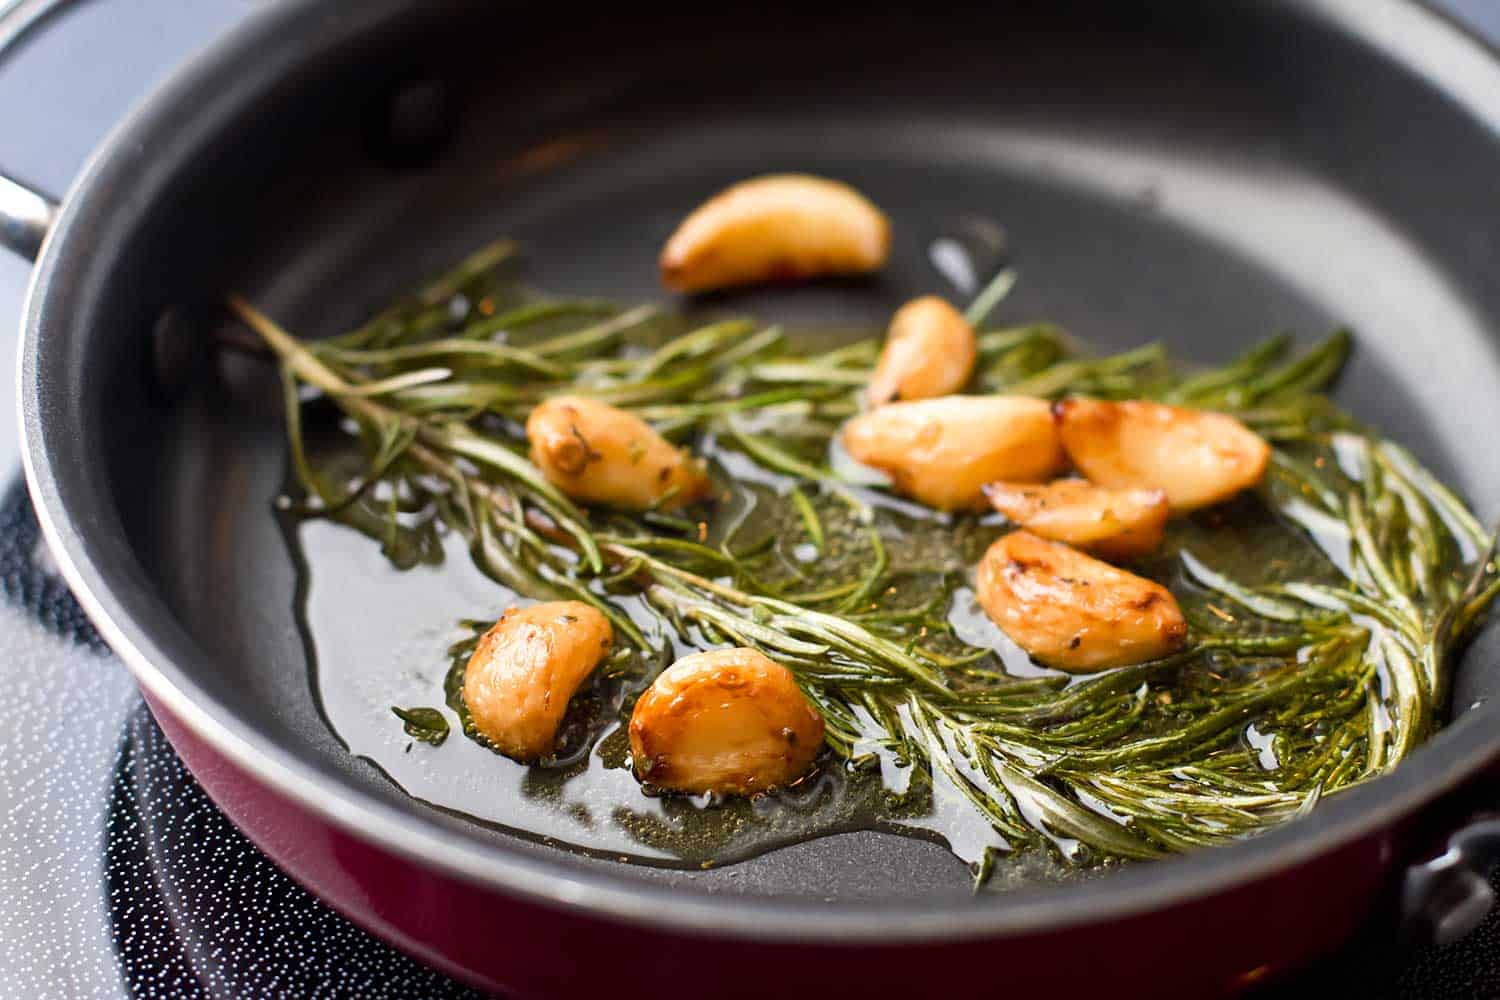 Sauteed garlic and rosemary in olive oil